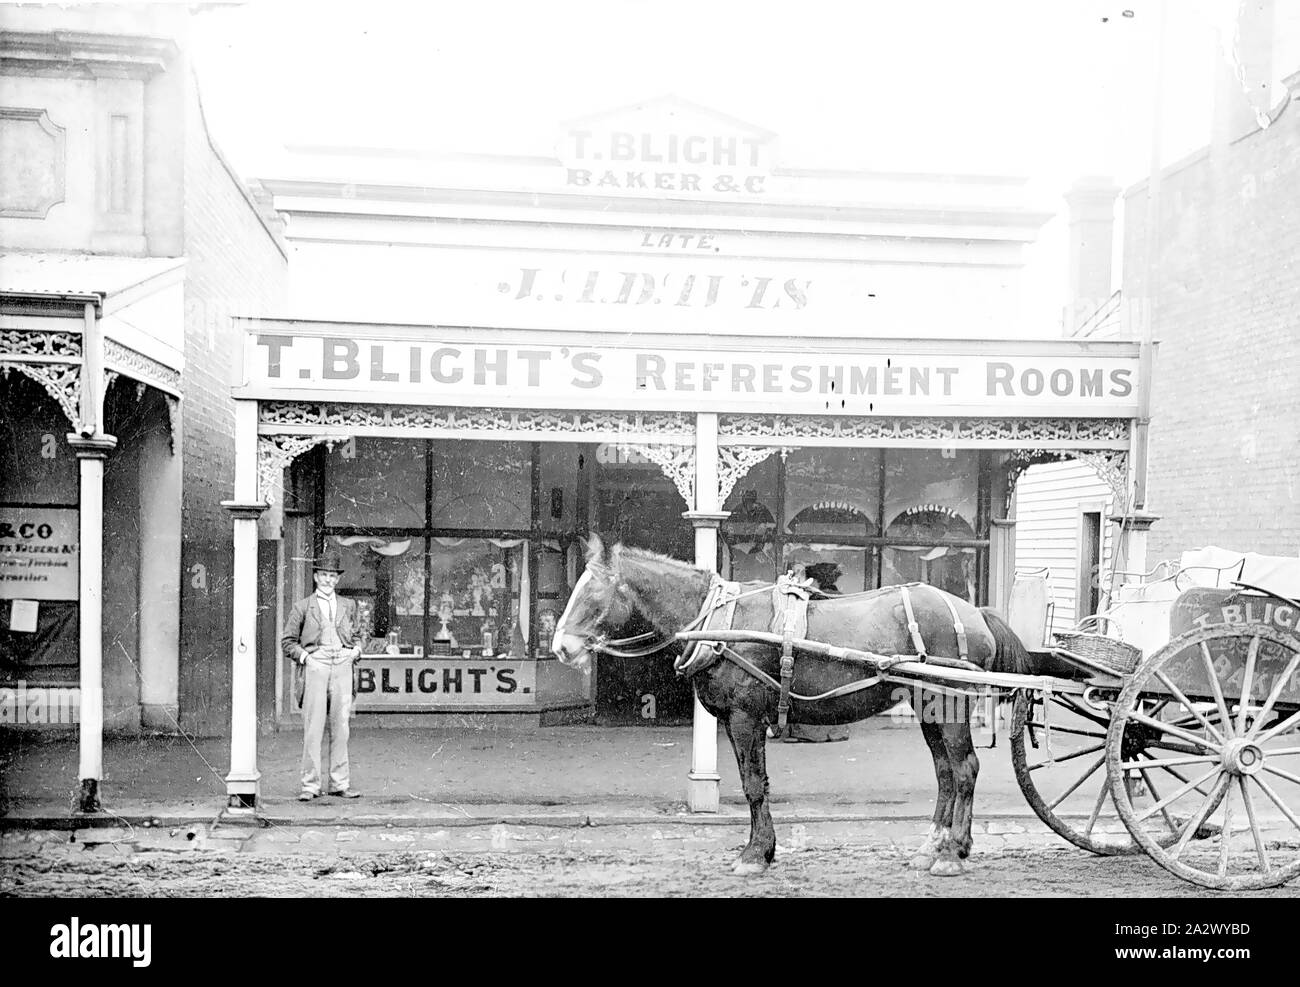 Negative - Horsham, Victoria, circa 1895, Thomas Blight standing in front of his refreshment rooms. There is a horse-drawn delivery cart in front of the building with the name Blight on it. The front windows are dressed for display Stock Photo